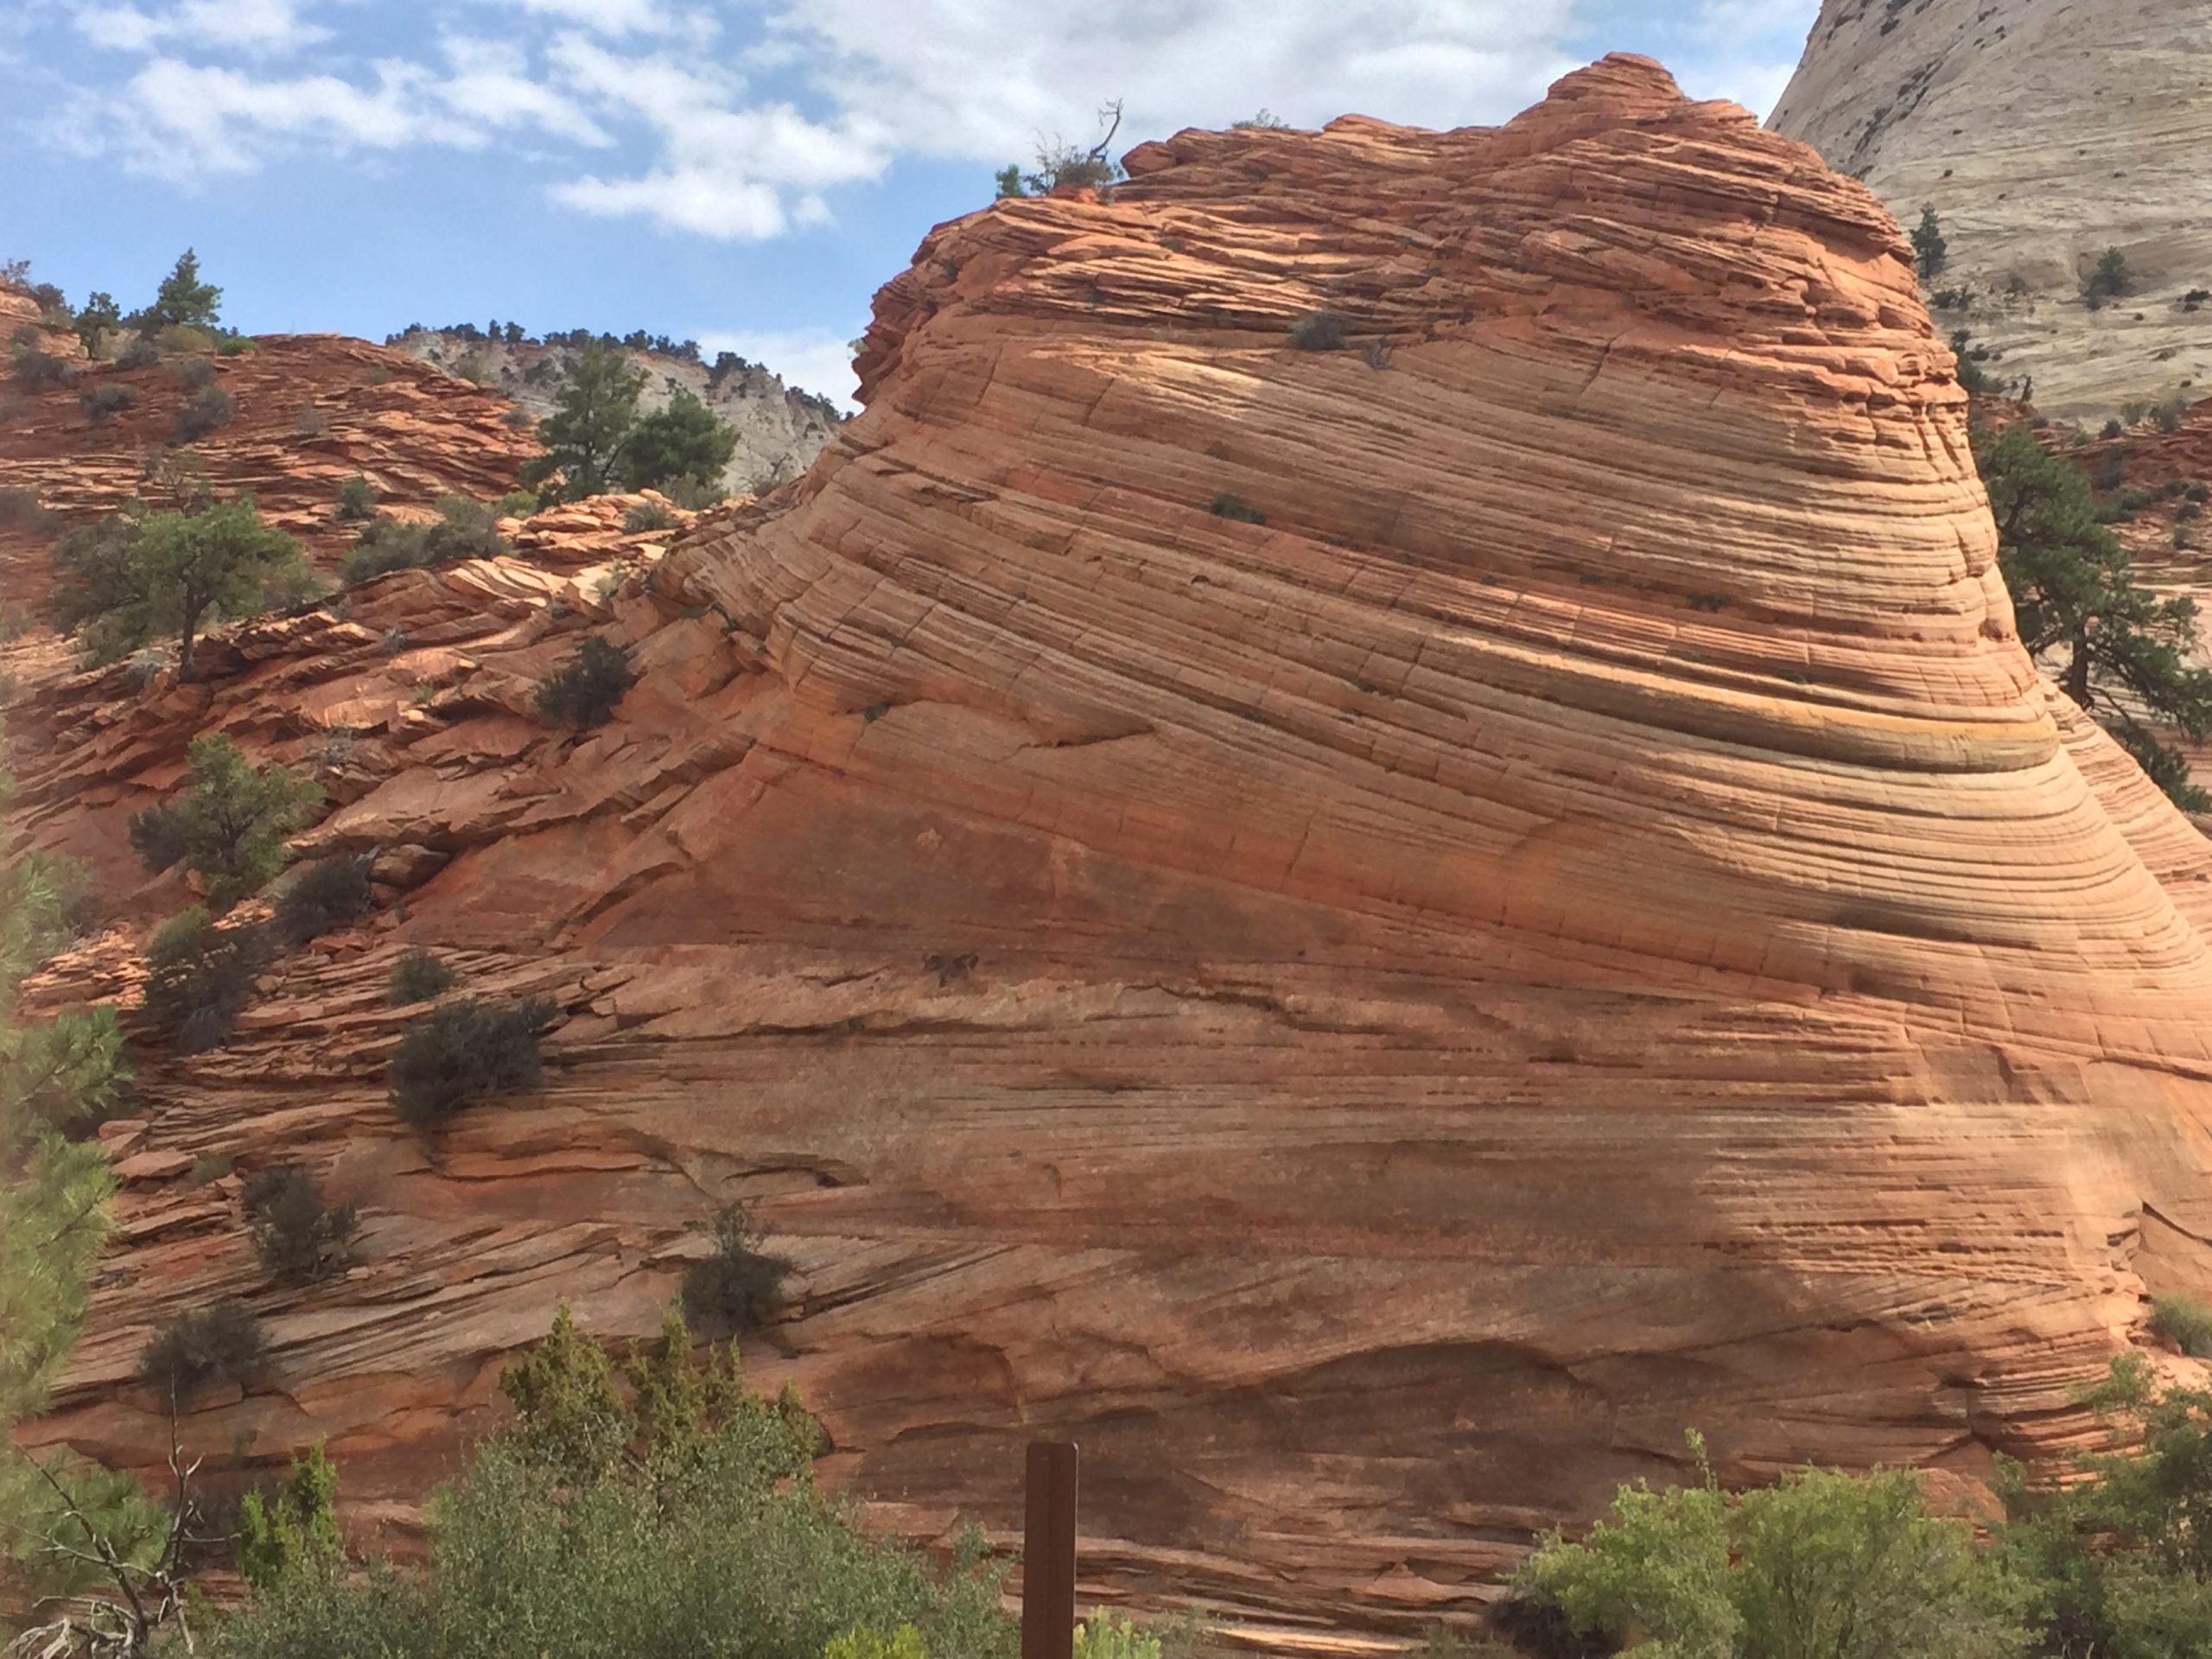 Reddish cross-bedded sedimentary rock layers from Zion National Park